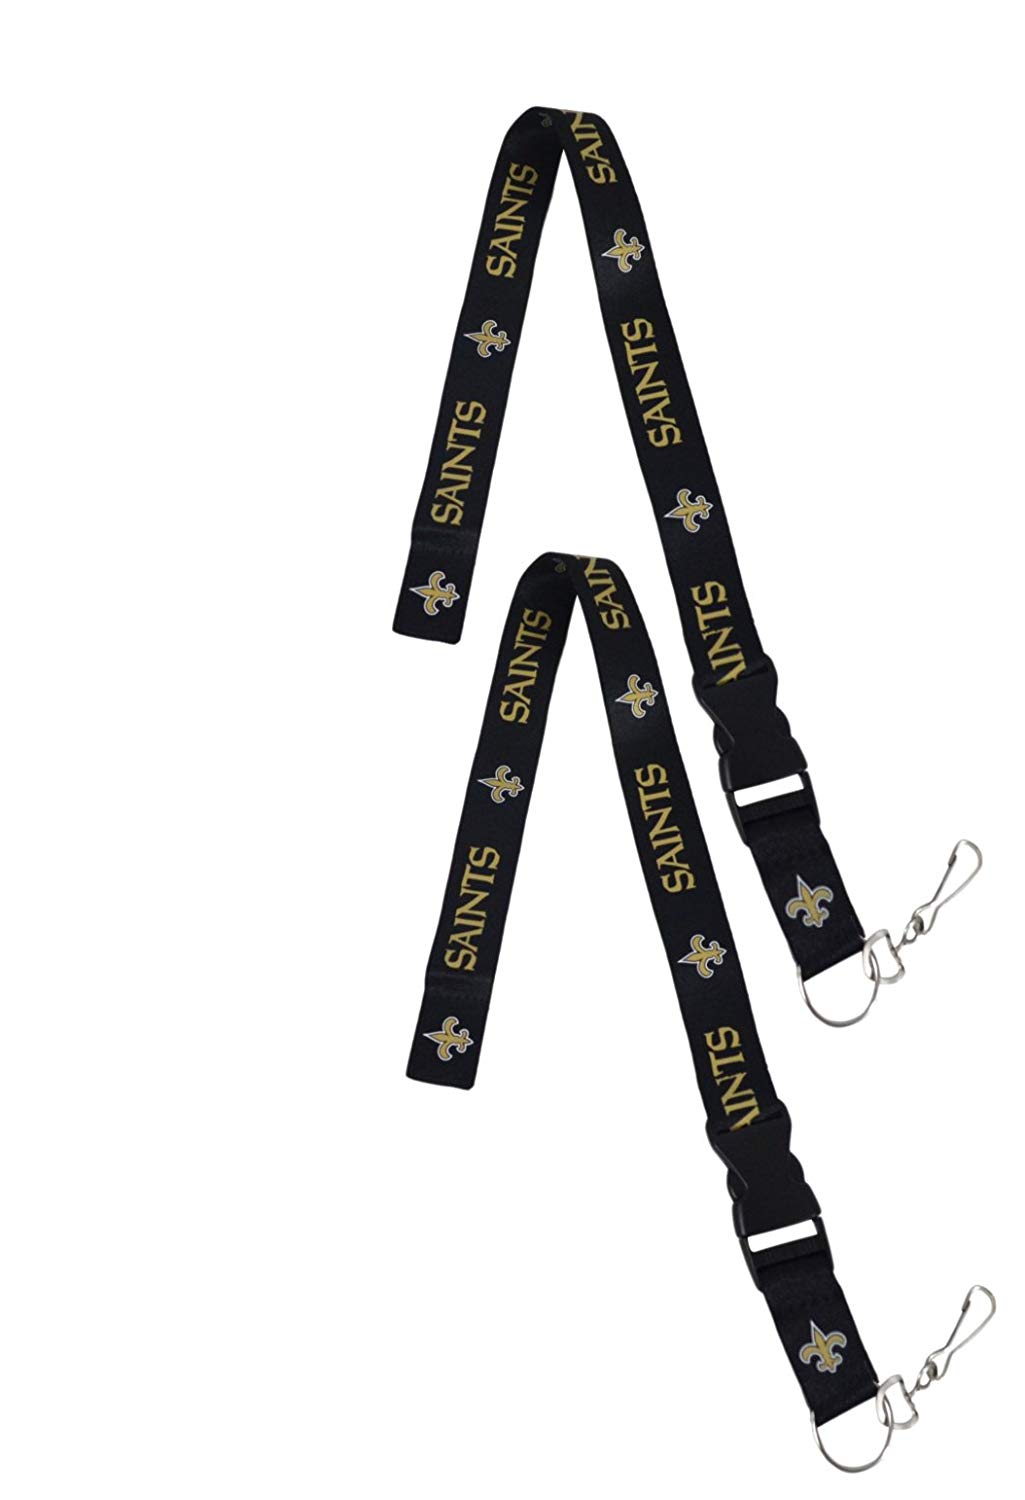 Official National Football League Fan Shop Authentic 2-pack NFL Lanyard/keychain Office Badge Holder